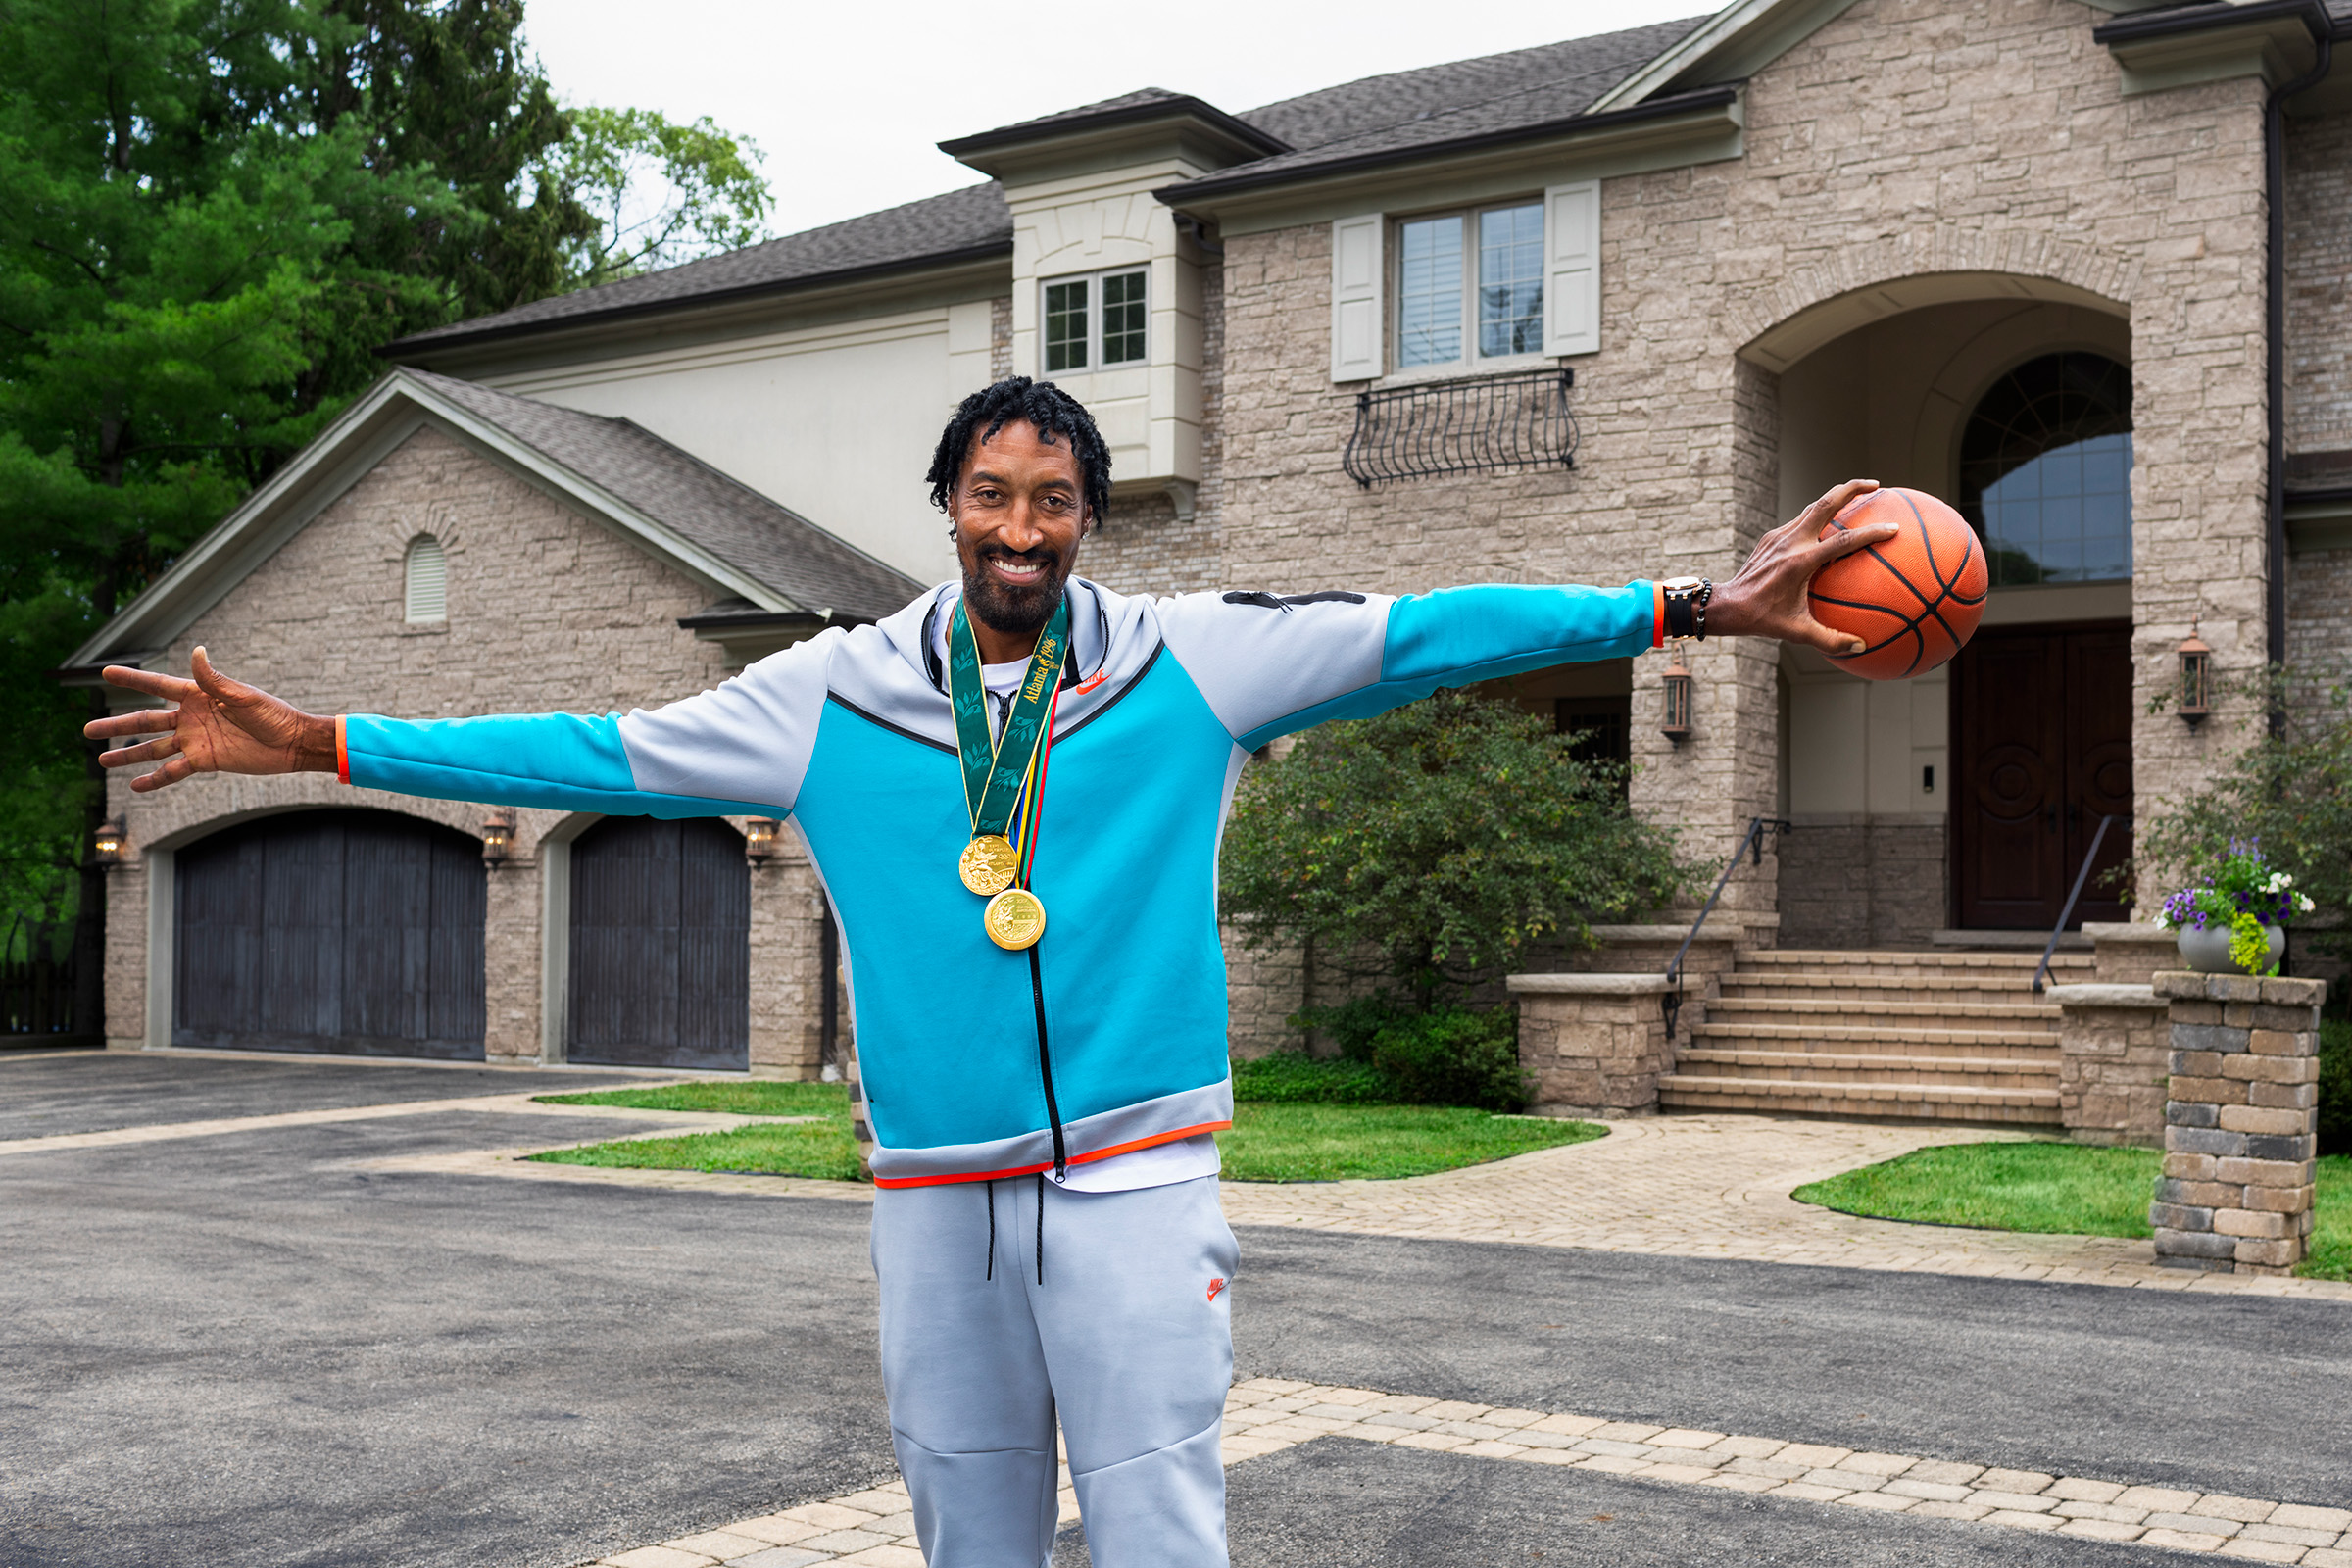 Scottie Pippen palms a ball outside of his Chicago home that he is listing on Airbnb.